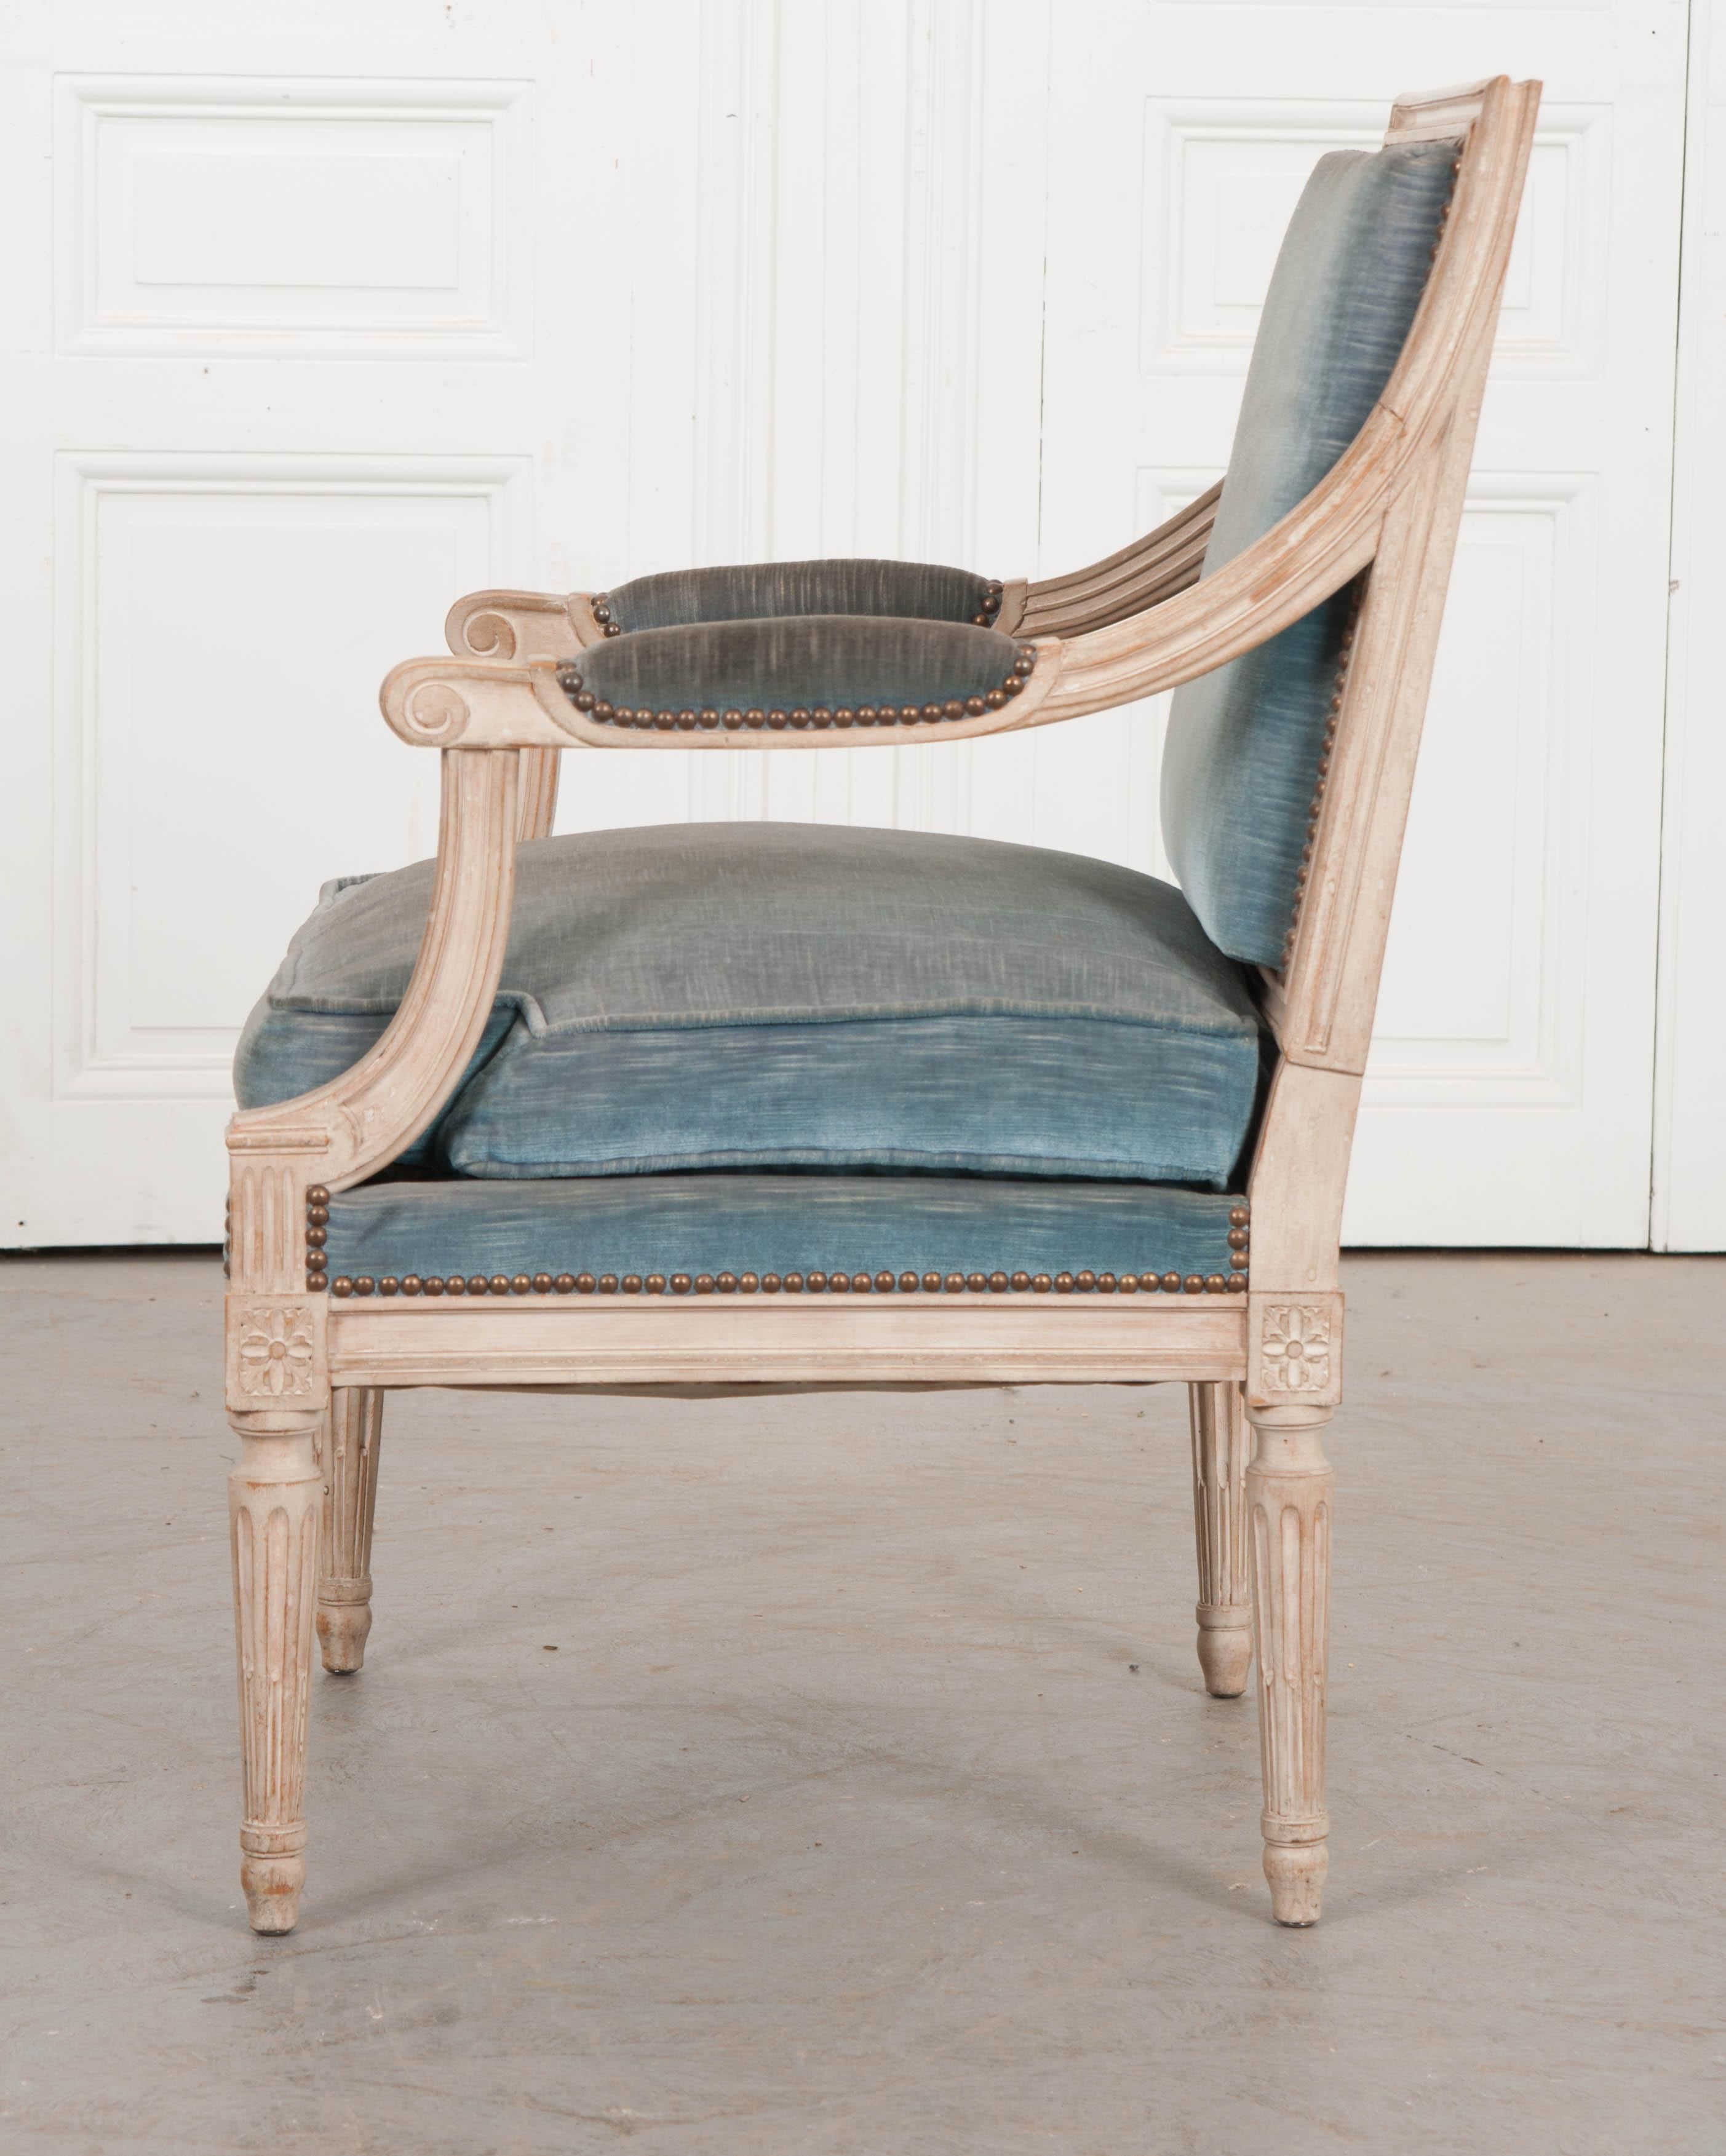 This elegant Louis XVI-style painted fauteuil, circa 1880, is from France and features a squared crest over padded open arms and having rosette and fluted tapering legs. Upholstered in a beautiful pale-cerulean velvet.